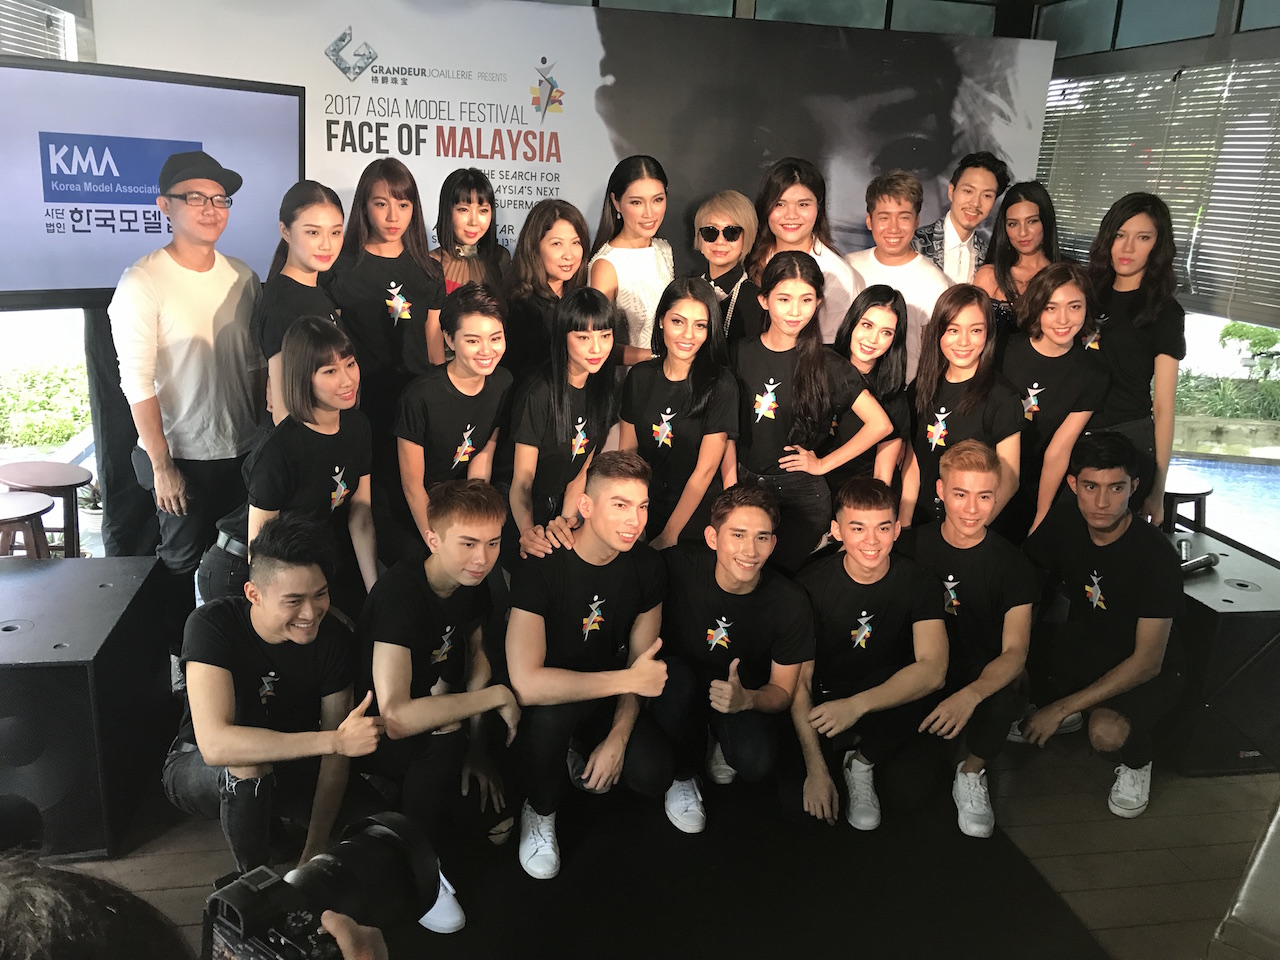 The 18 finalists together with the judges of 2017 Face of Malaysia